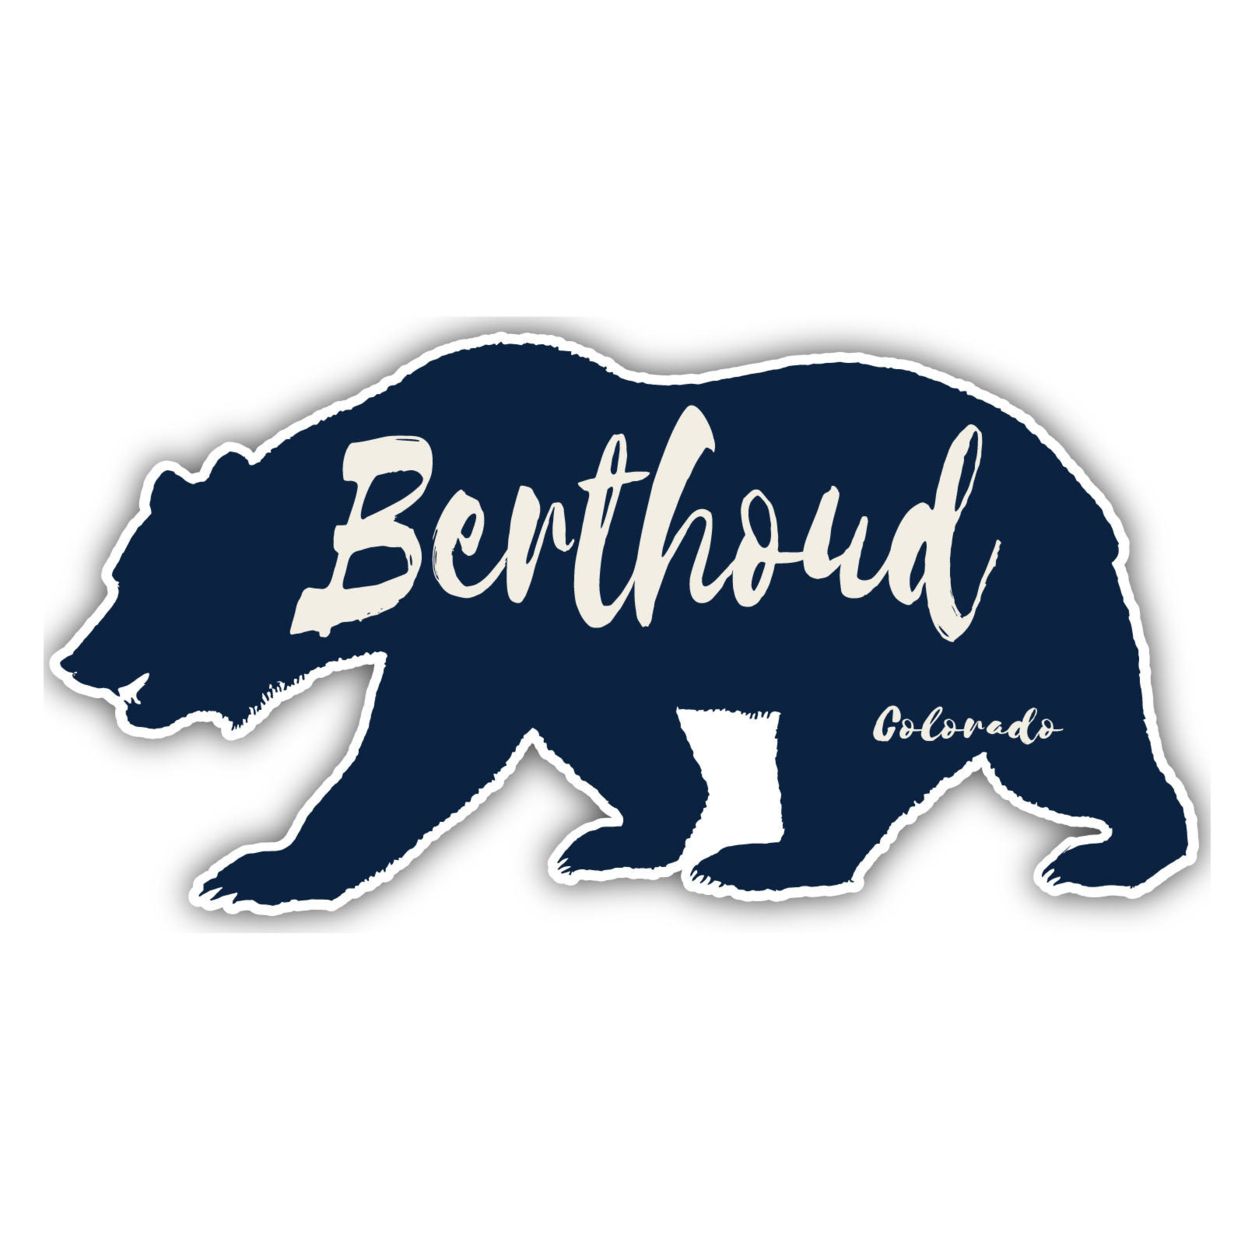 Berthoud Colorado Souvenir Decorative Stickers (Choose Theme And Size) - 4-Pack, 12-Inch, Adventures Awaits